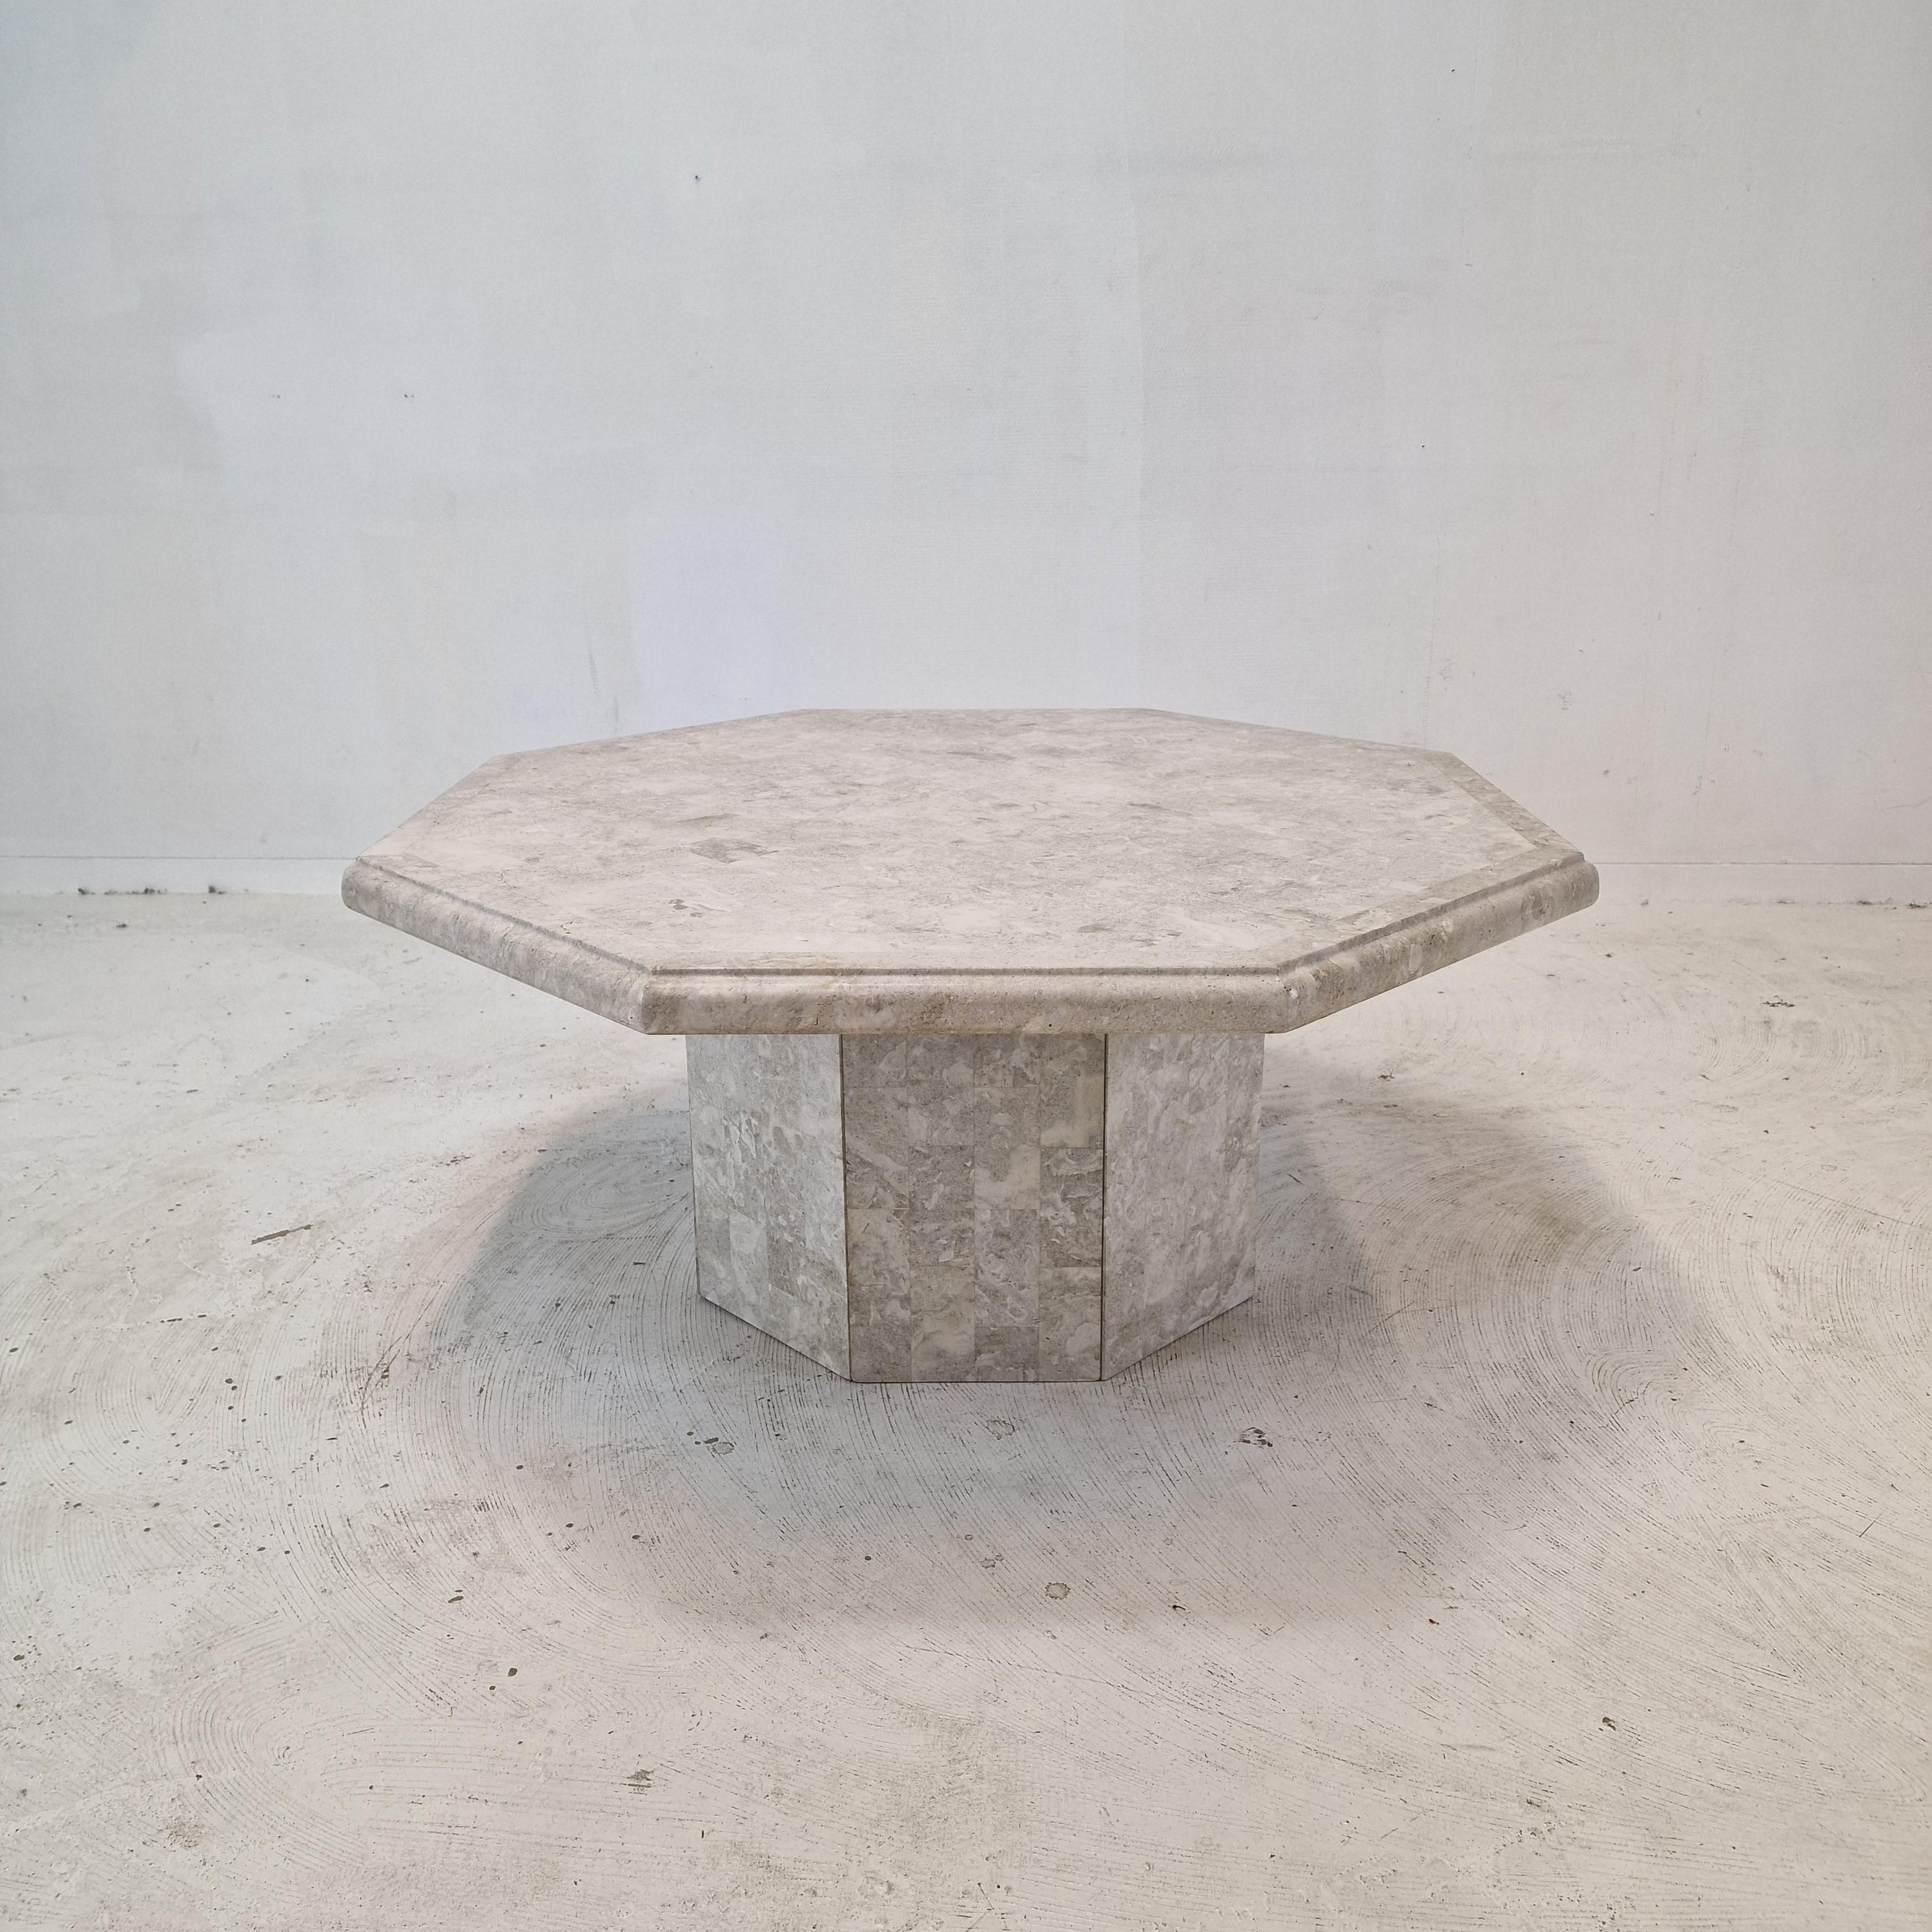 Very nice and rare coffee or side table, fabricated in Belgium in the 80's.

This stunning table is made of polished edged Mactan stone or Fossil stone.
The weight is around 25 kg (90 lbs).

Please take notice of the very nice patterns. 

It has the